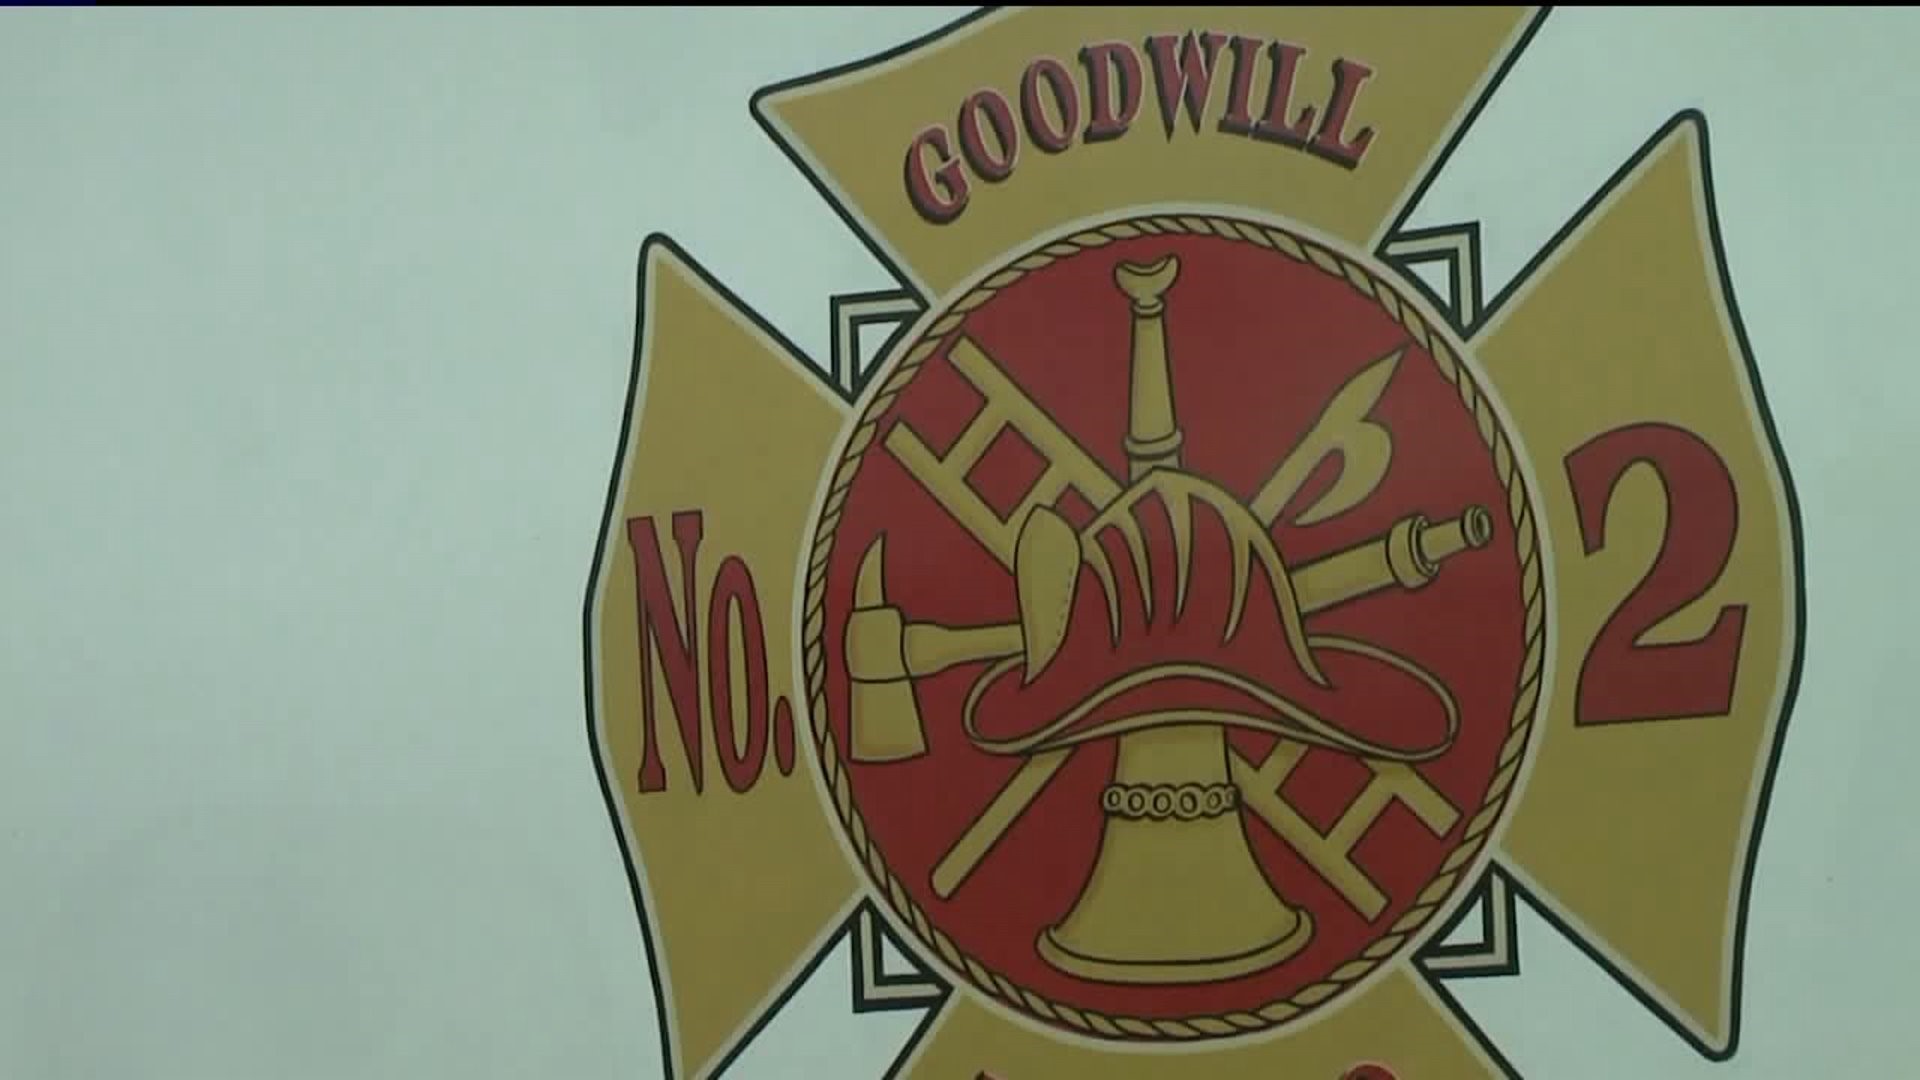 Firefighters Disapprove of Plans to Close Hose Company